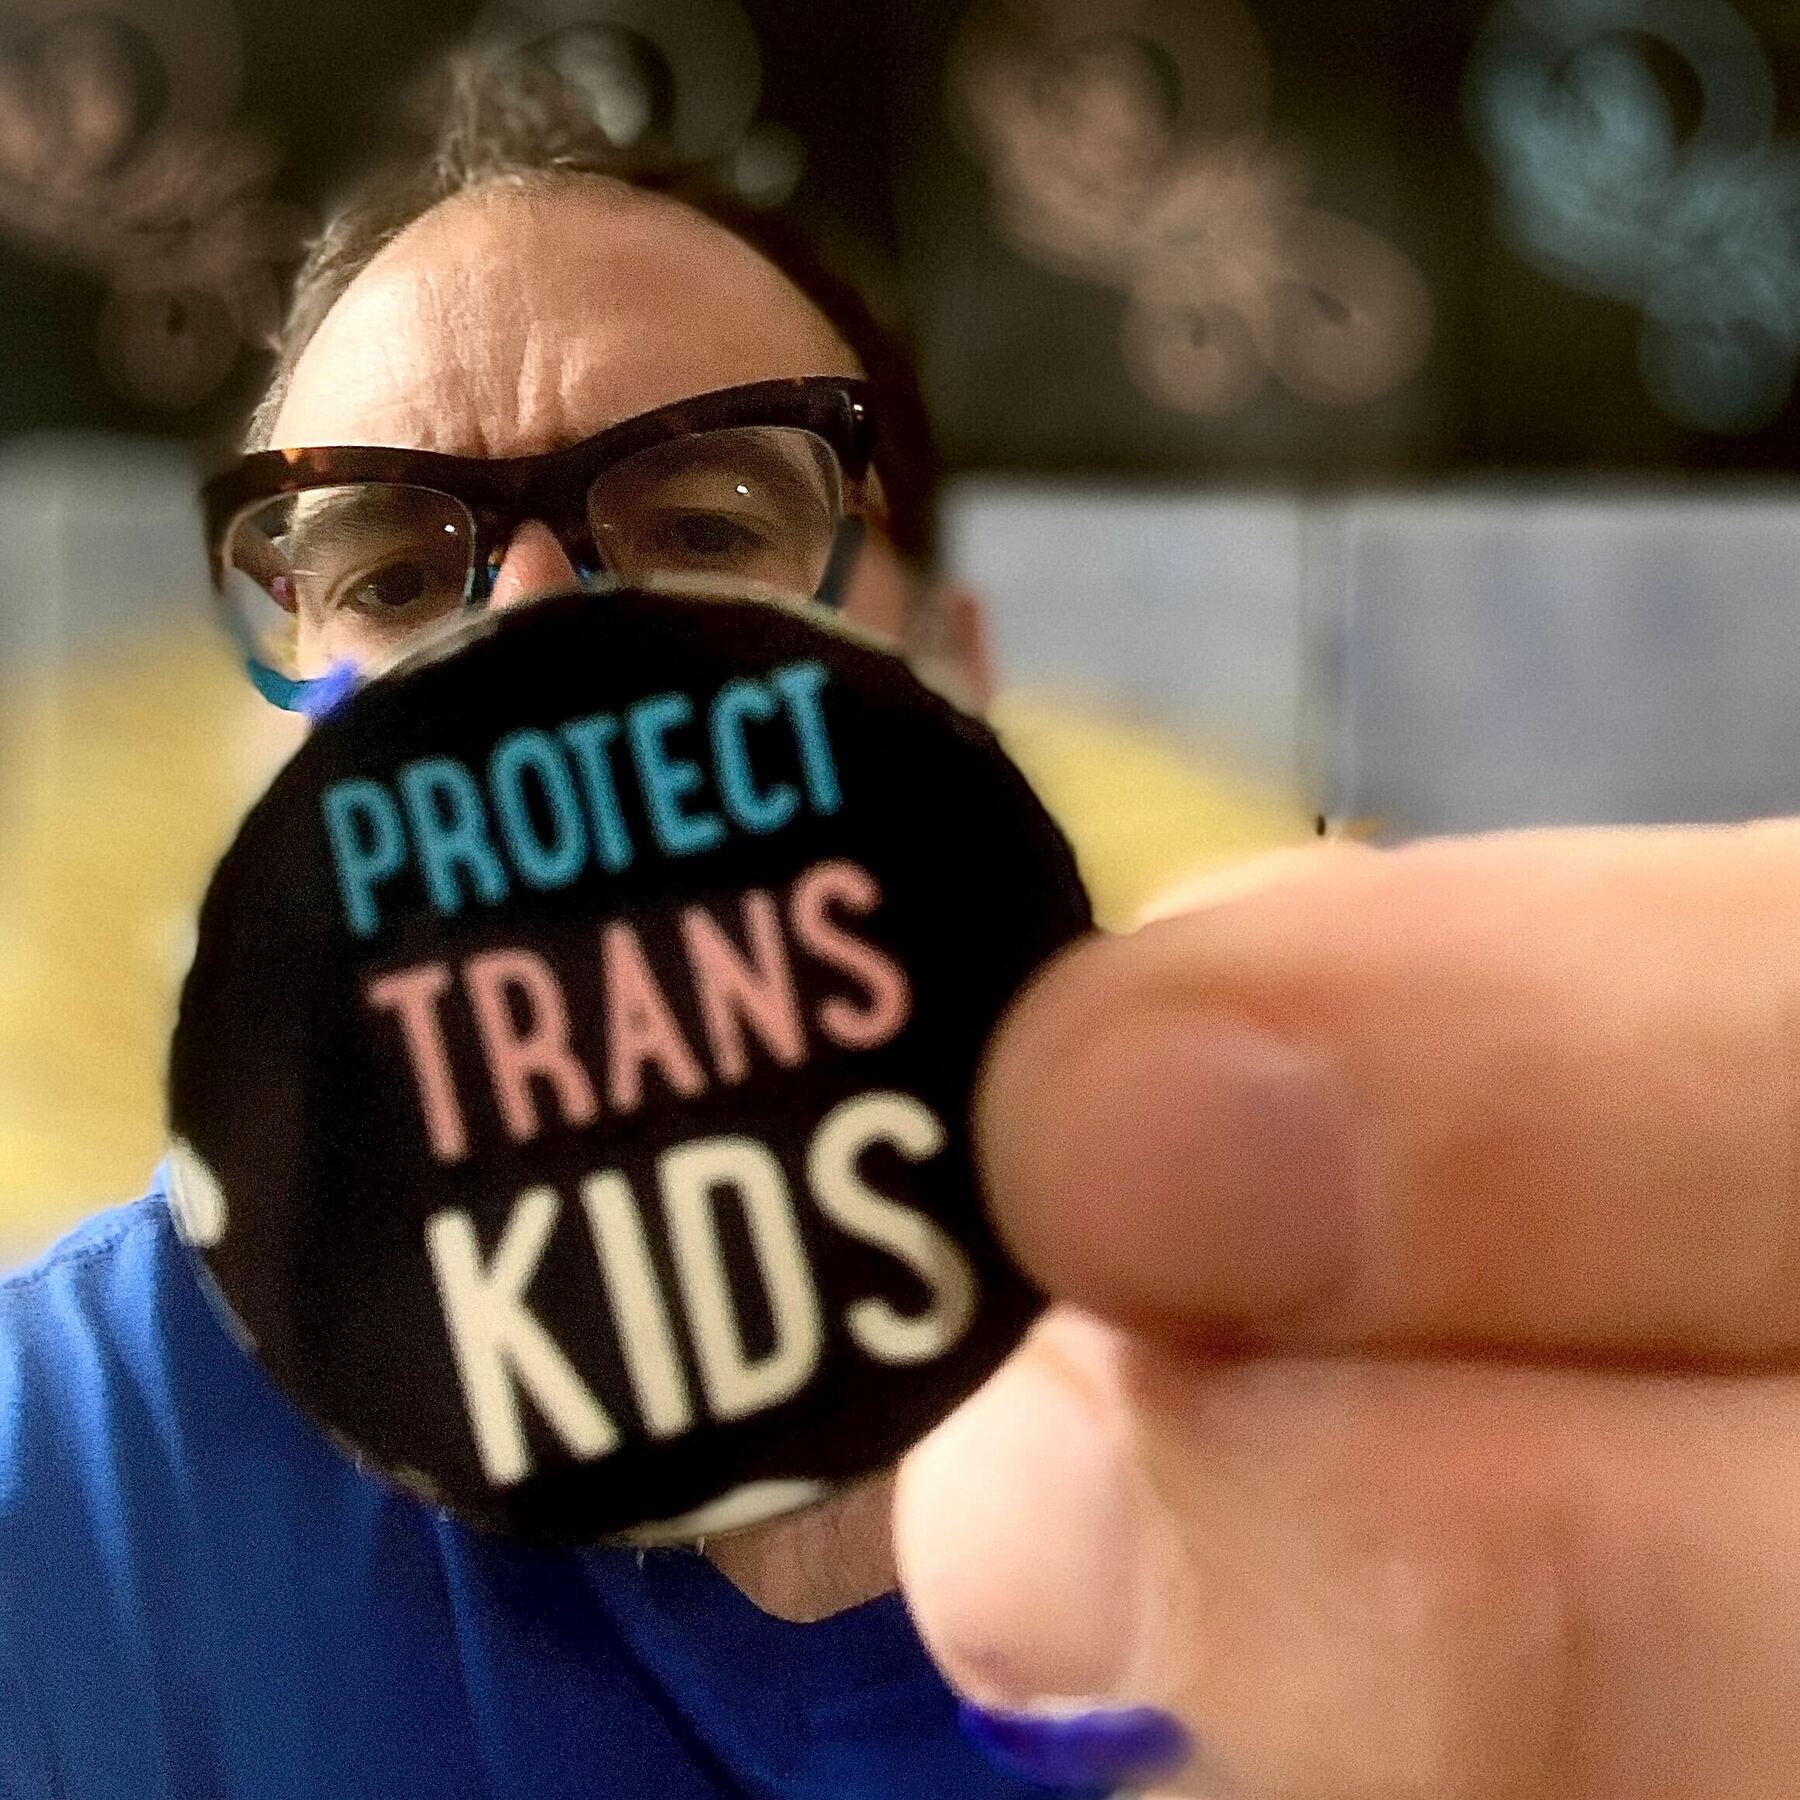 Mike Monteiro wearing glasses holding protect trans kids button.